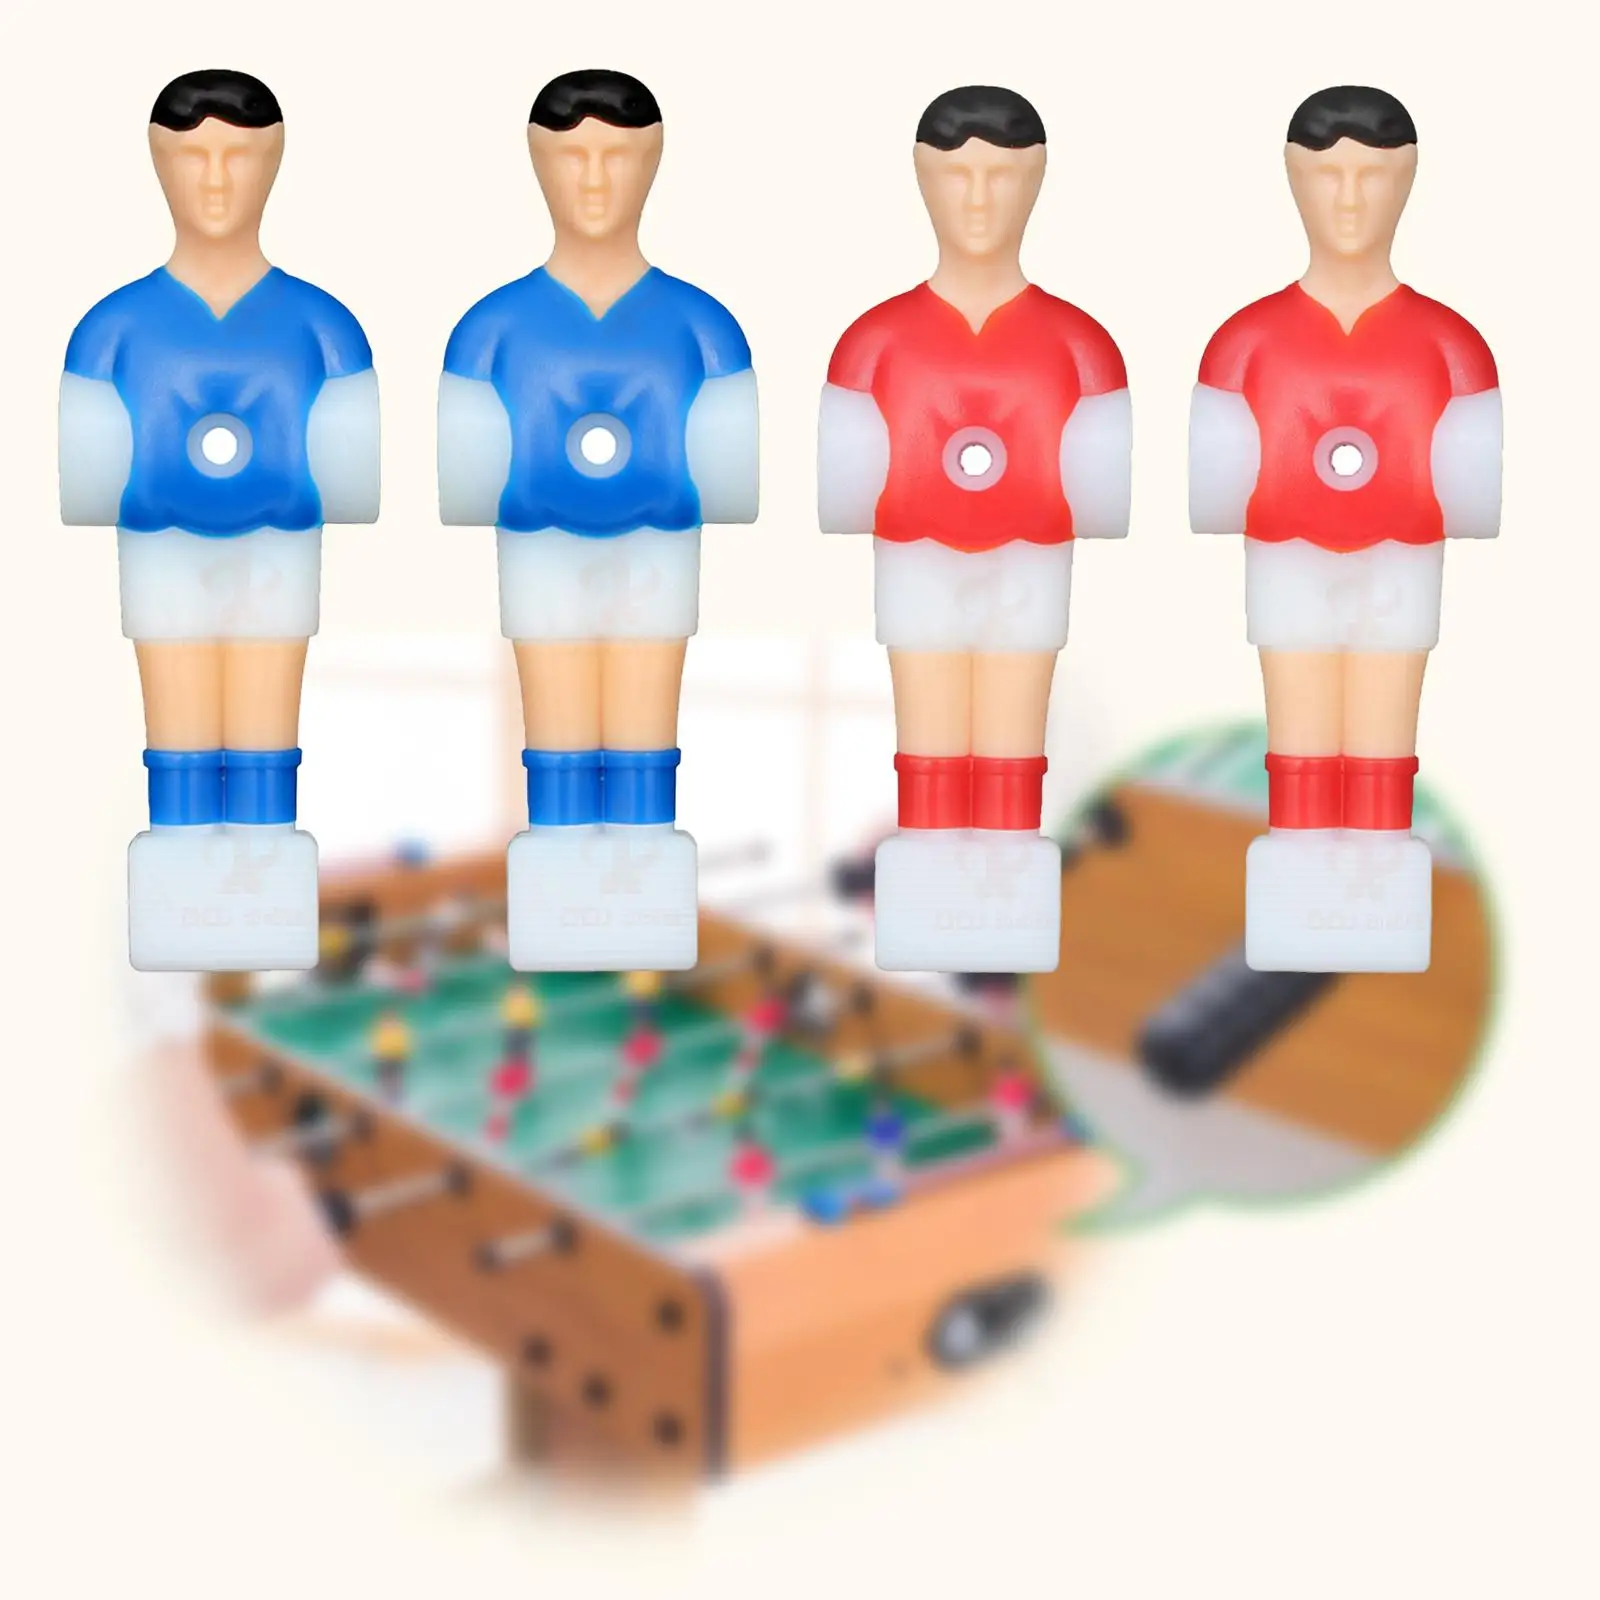 4Pcs Foosball Men Soccer Table Player Mini Doll Table Football Machine Accessory Table Foosball Player Replacement Parts